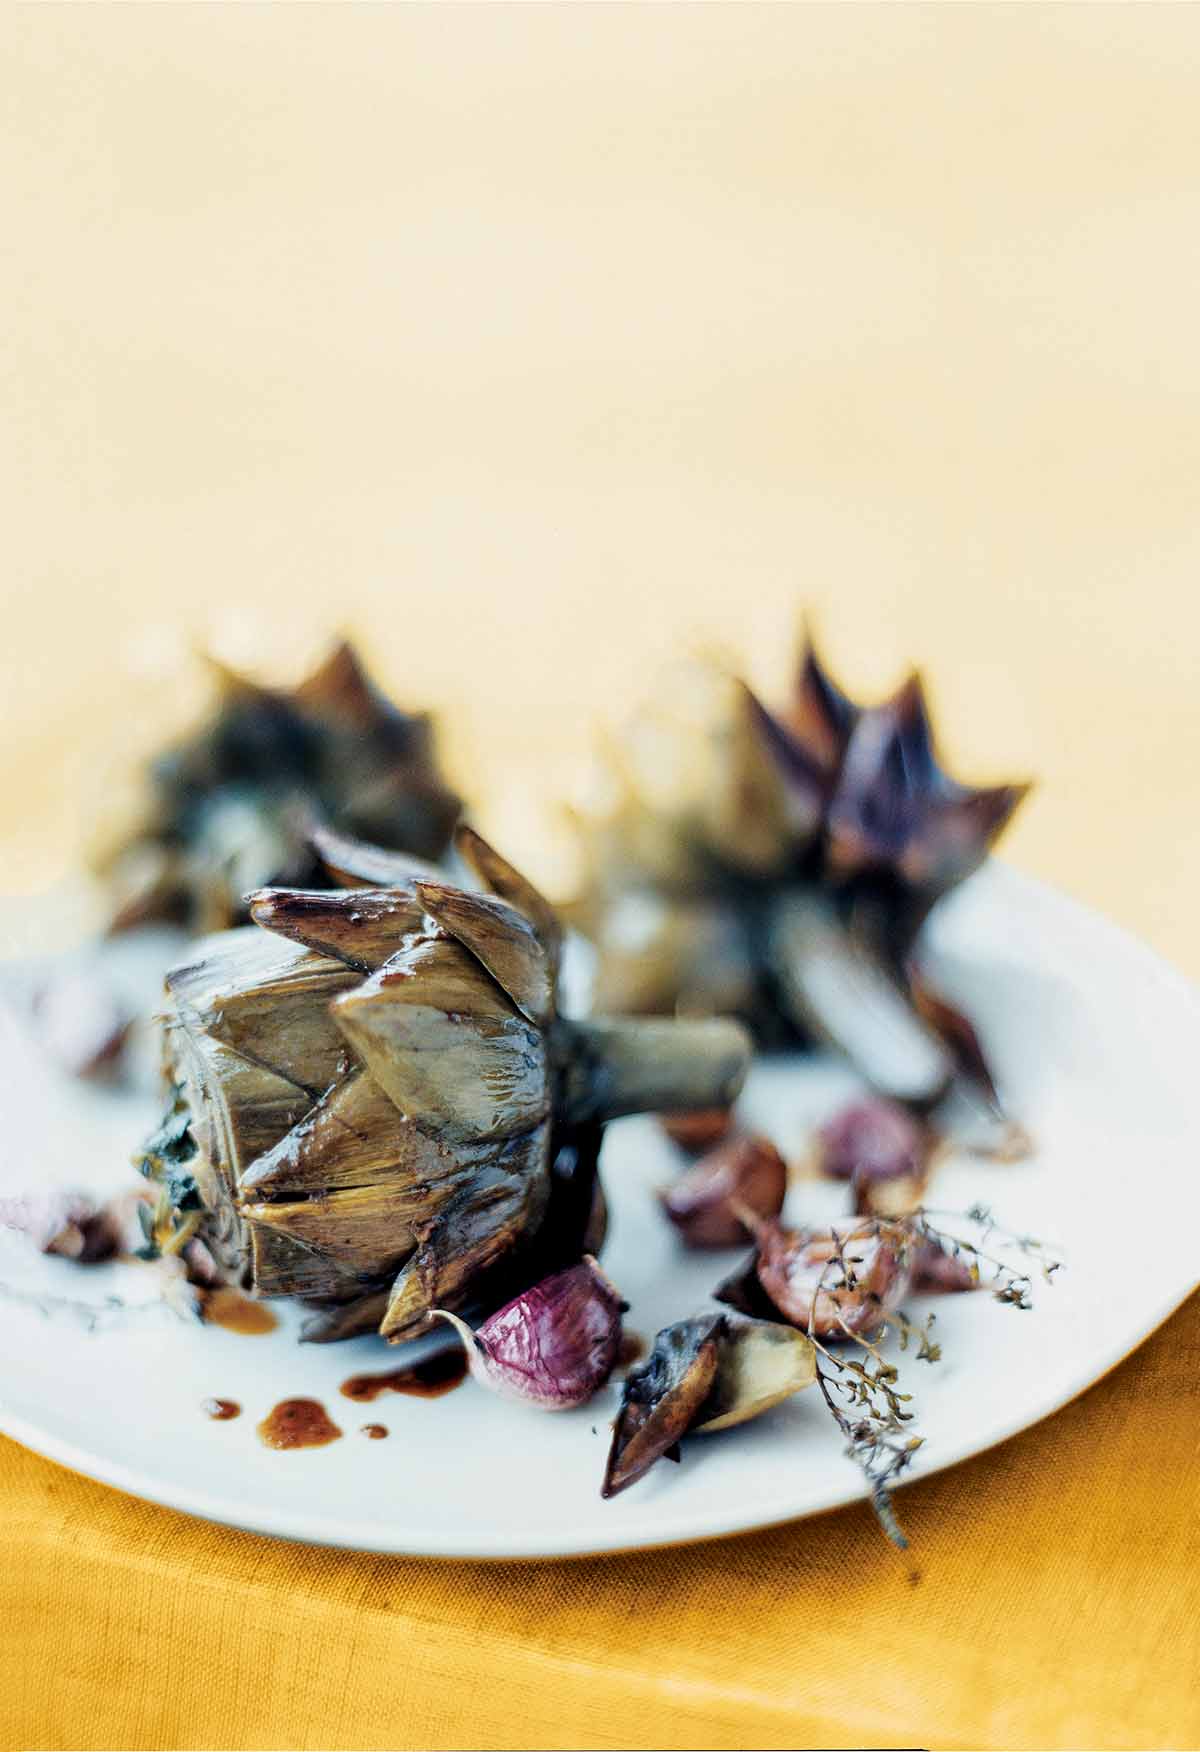 Three braised artichokes with garlic and thyme on a white plate.